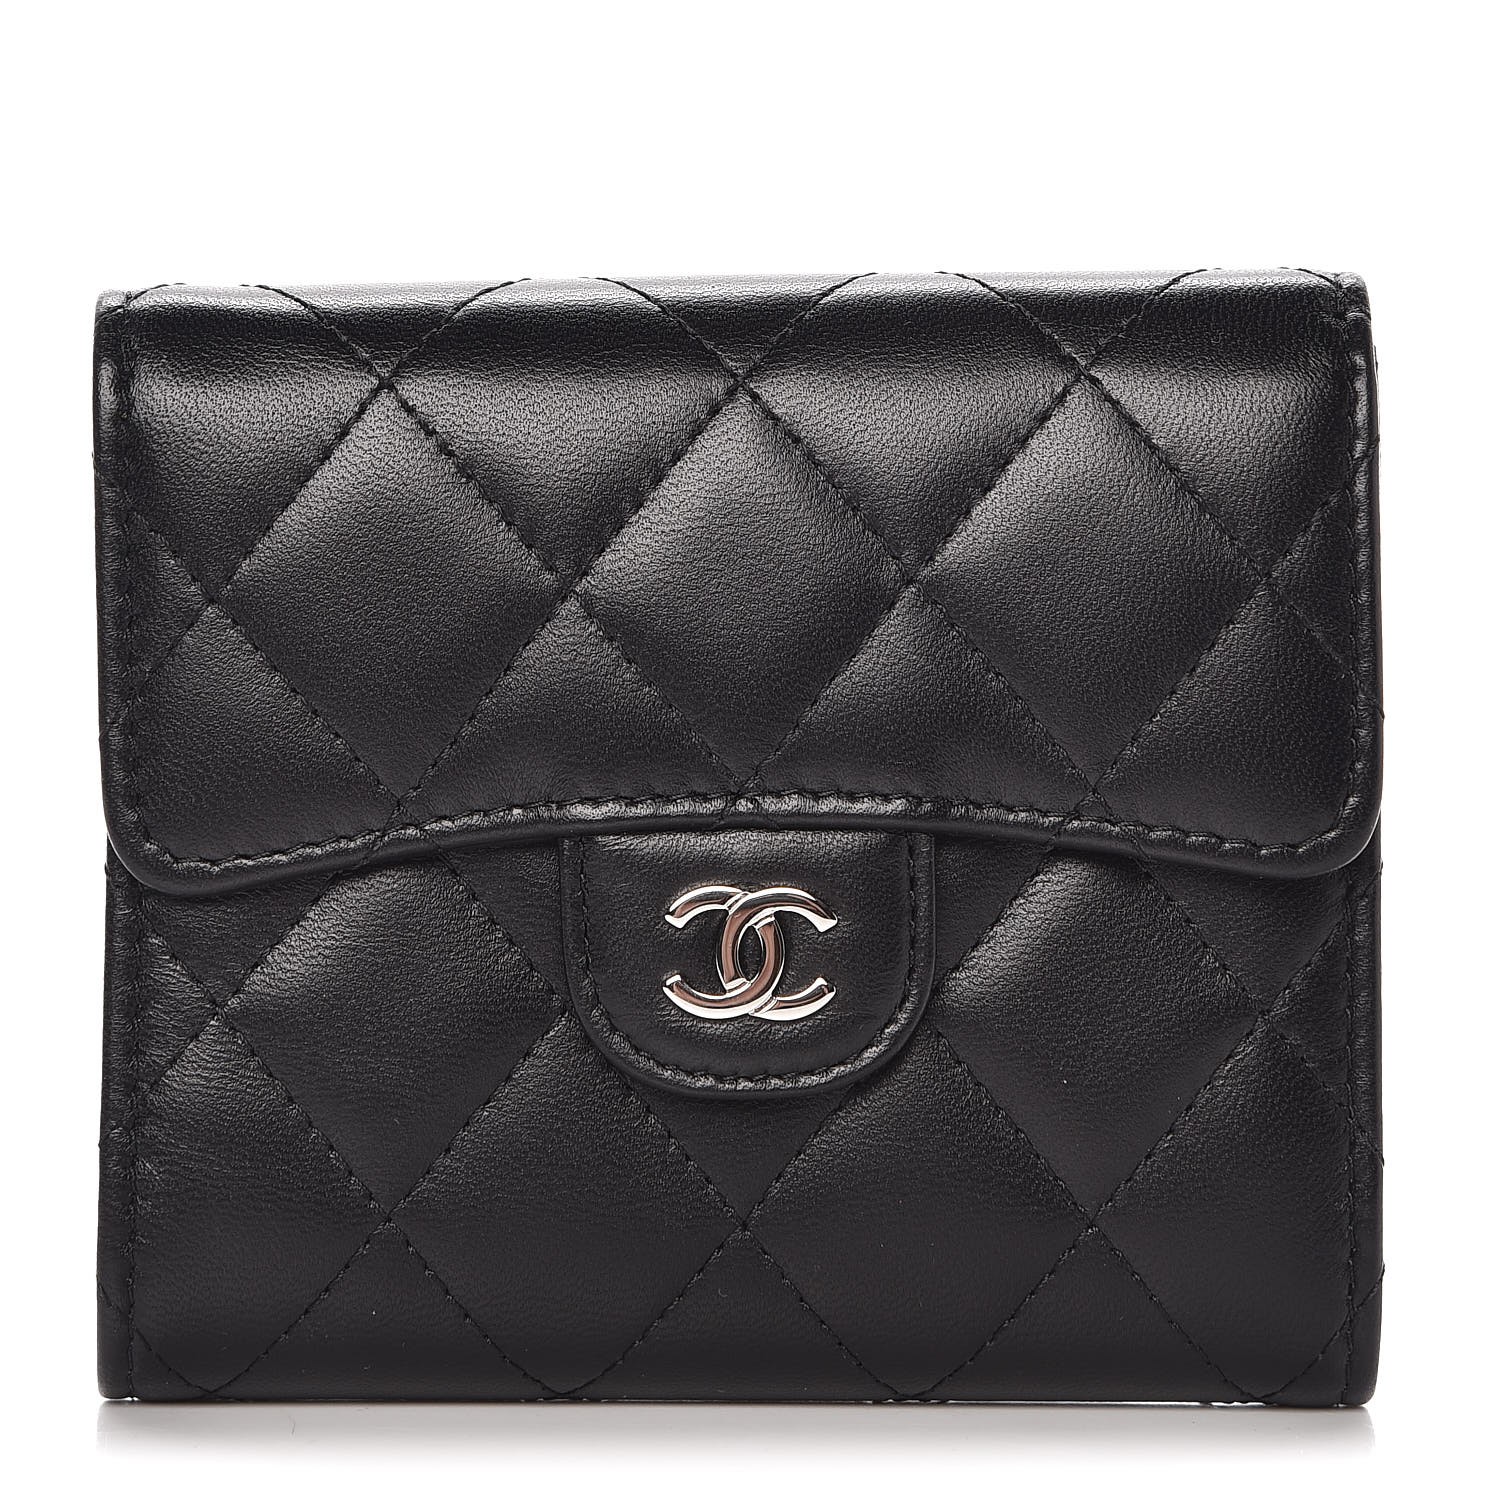 CHANEL Lambskin Quilted Small Compact Wallet Black 325056